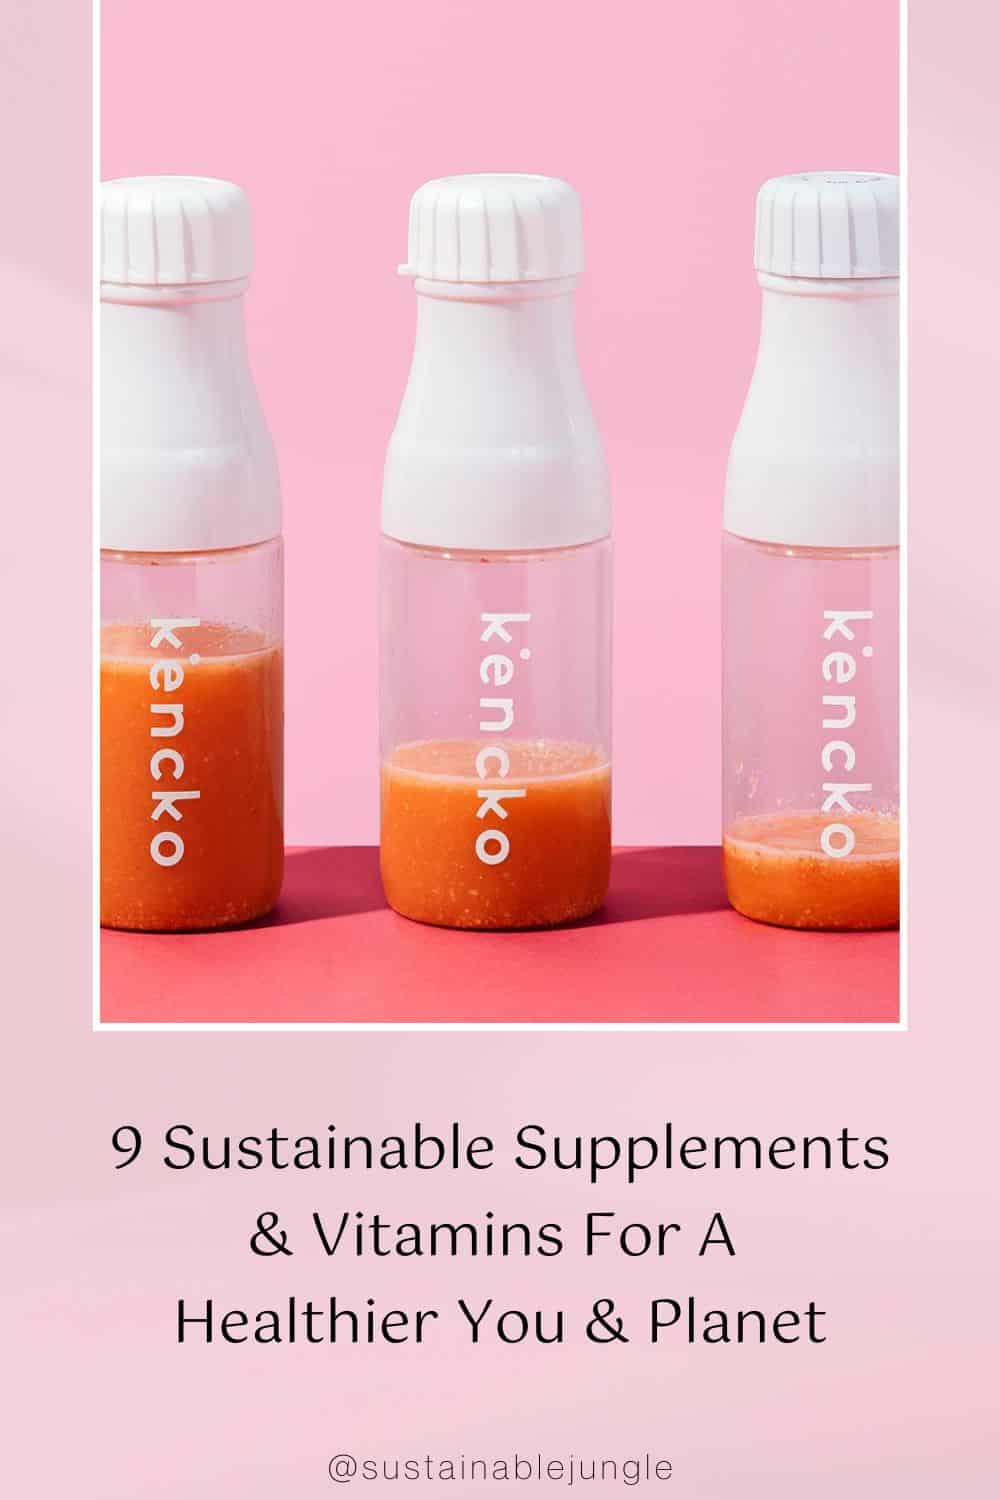 9 Sustainable Supplements & Vitamins For A Healthier You & Planet Image by kencko #sustainablesupplements #sustainablevitamins #zerowastevitamins #zerowastesupplements #sustainablepackagingforvitamins #sustainablejungle